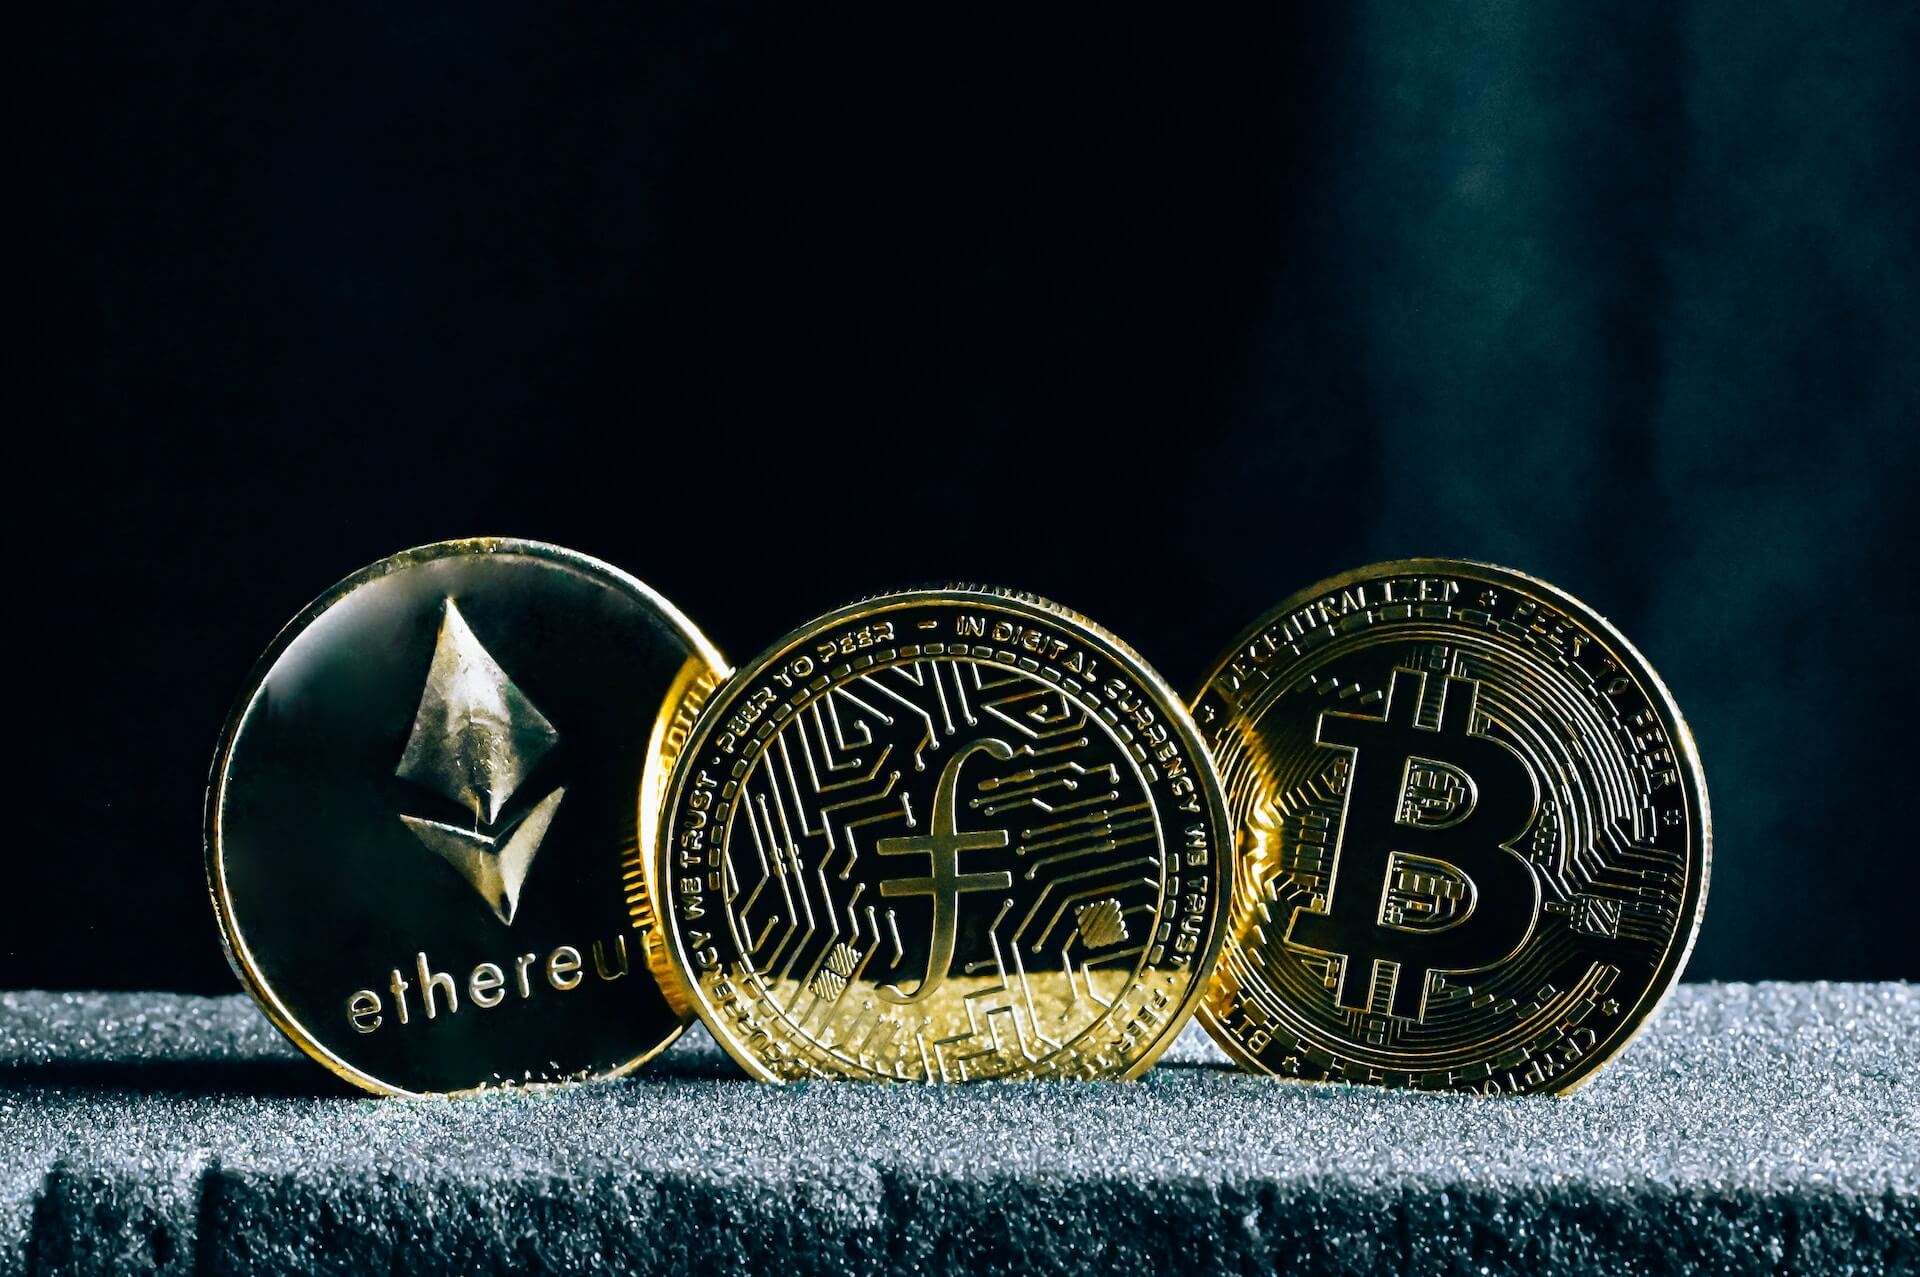 Bitcoin, Ethereum, and Filecoin physical coins representing different cryptocurrencies.